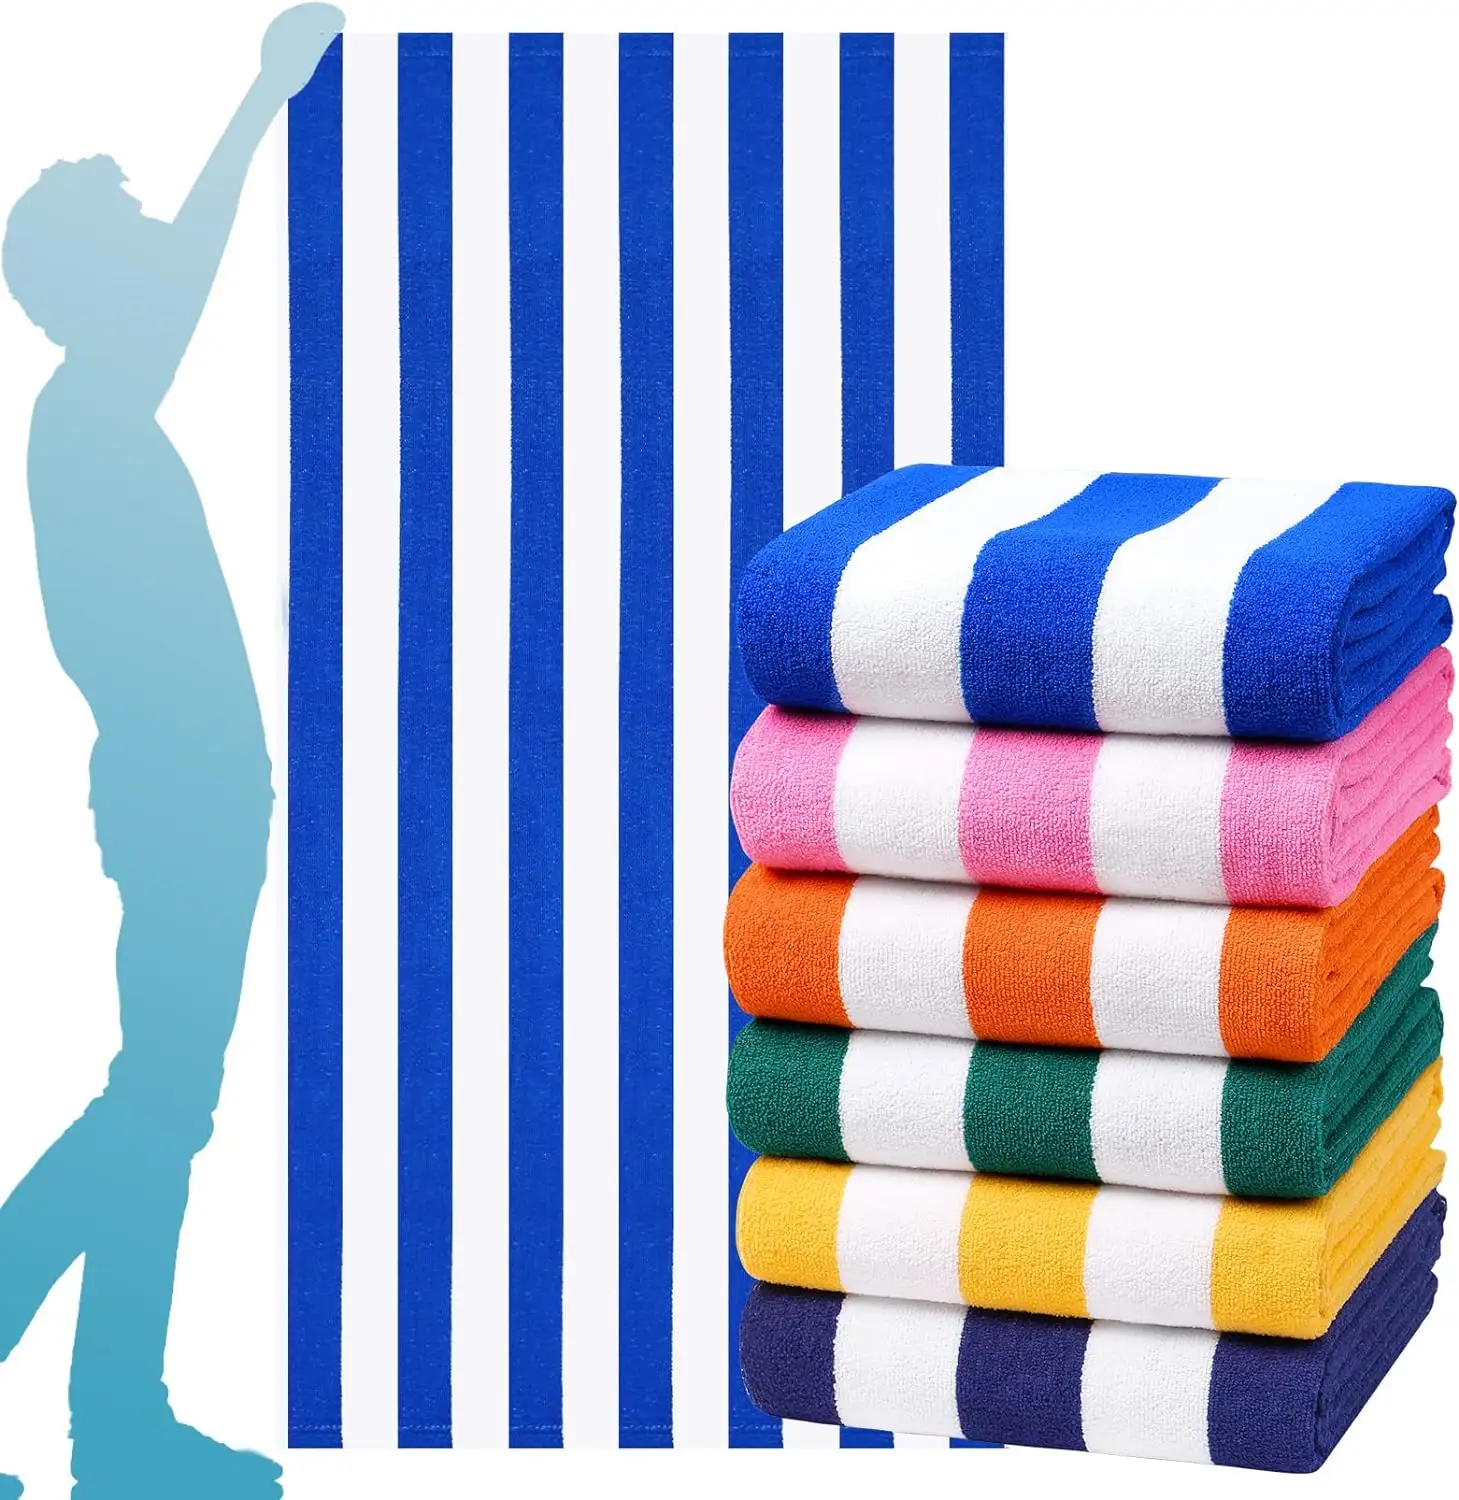 Custom Color Dyed Printed Beach Towel Cotton High Quality Towel Pool Oem Black Grey and White Striped Beach Towels